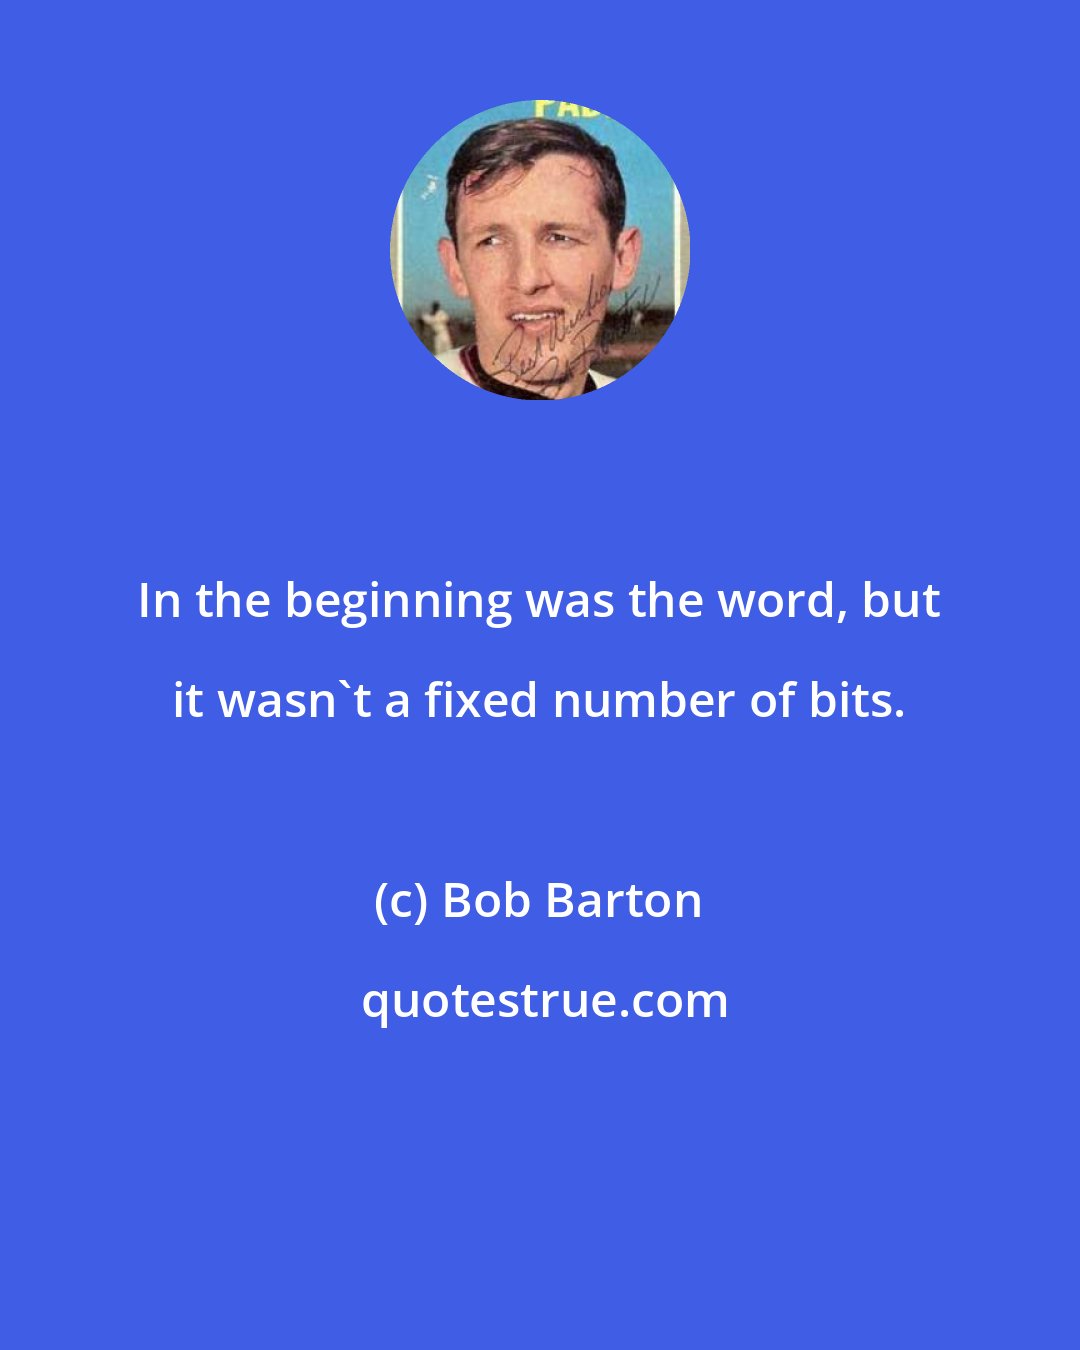 Bob Barton: In the beginning was the word, but it wasn't a fixed number of bits.